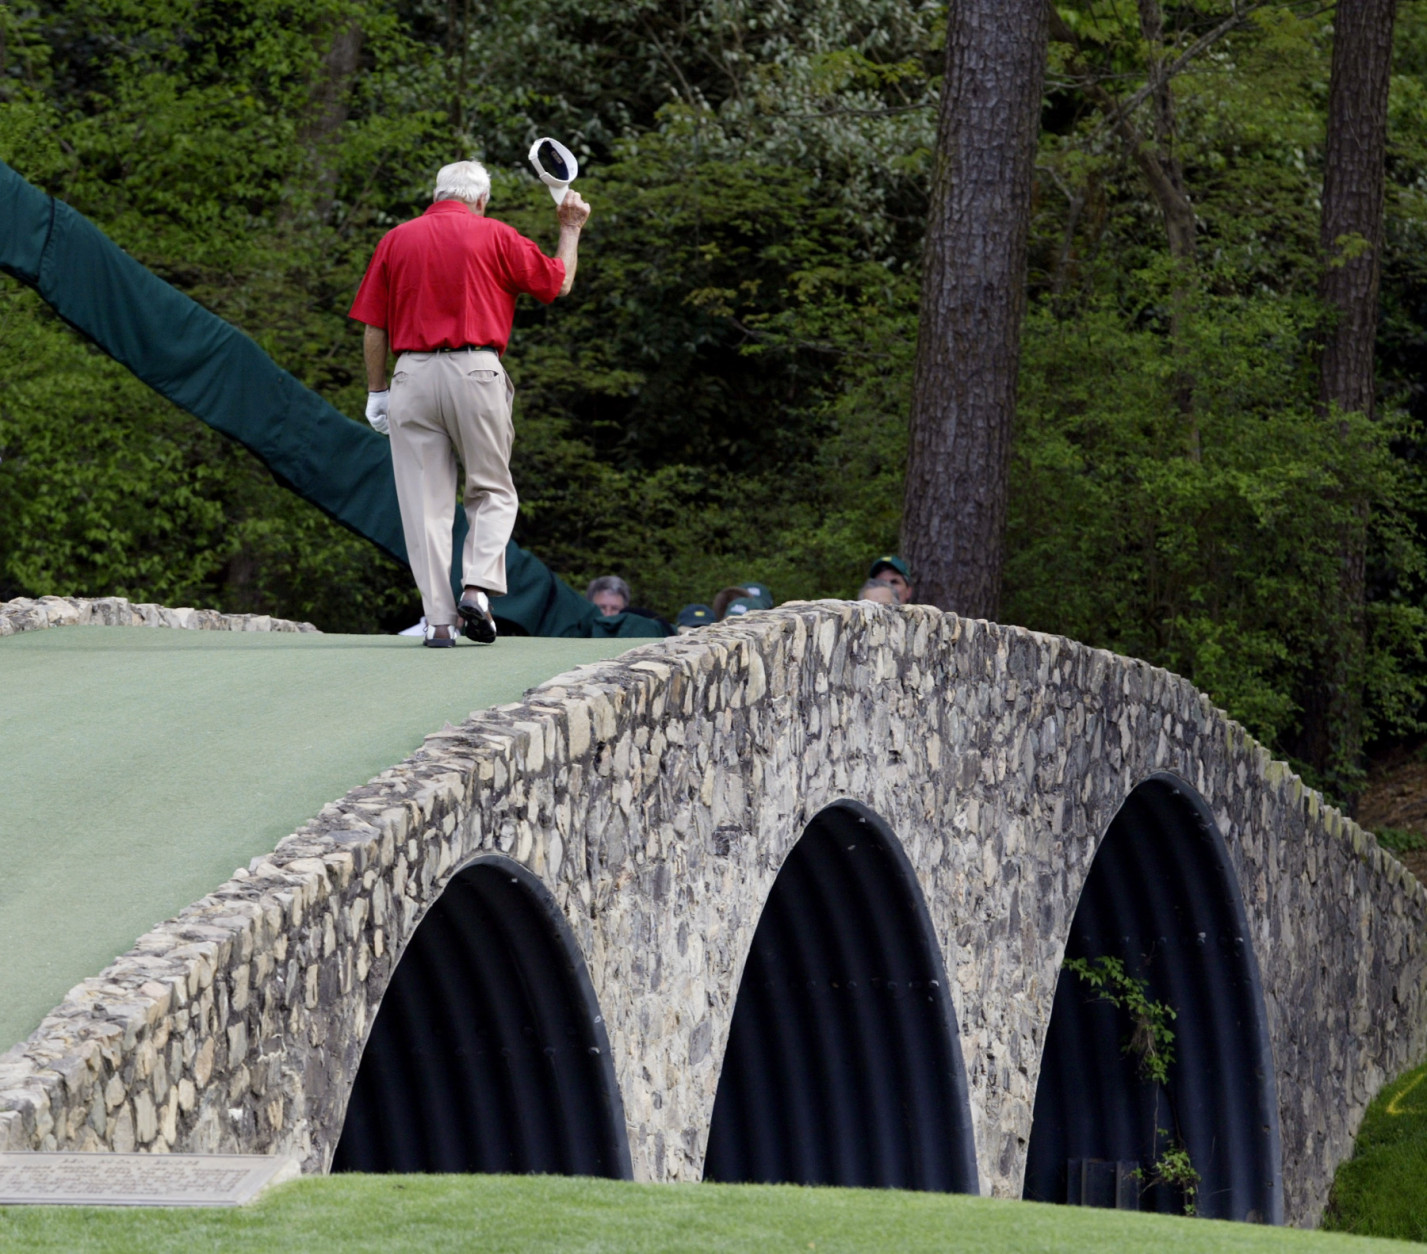 File- This April 9, 2004, file photo shows Arnold Palmer walking across the Hogan Bridge on the 12th fairway for the final time in Masters competition during the second round of the Masters golf tournament at the Augusta National Golf Club in Augusta, Ga.  Palmer, who made golf popular for the masses with his hard-charging style, incomparable charisma and a personal touch that made him known throughout the golf world as "The King," died Sunday, Sept. 25, 2016, in Pittsburgh. He was 87. (AP Photo/Amy Sancetta, File)